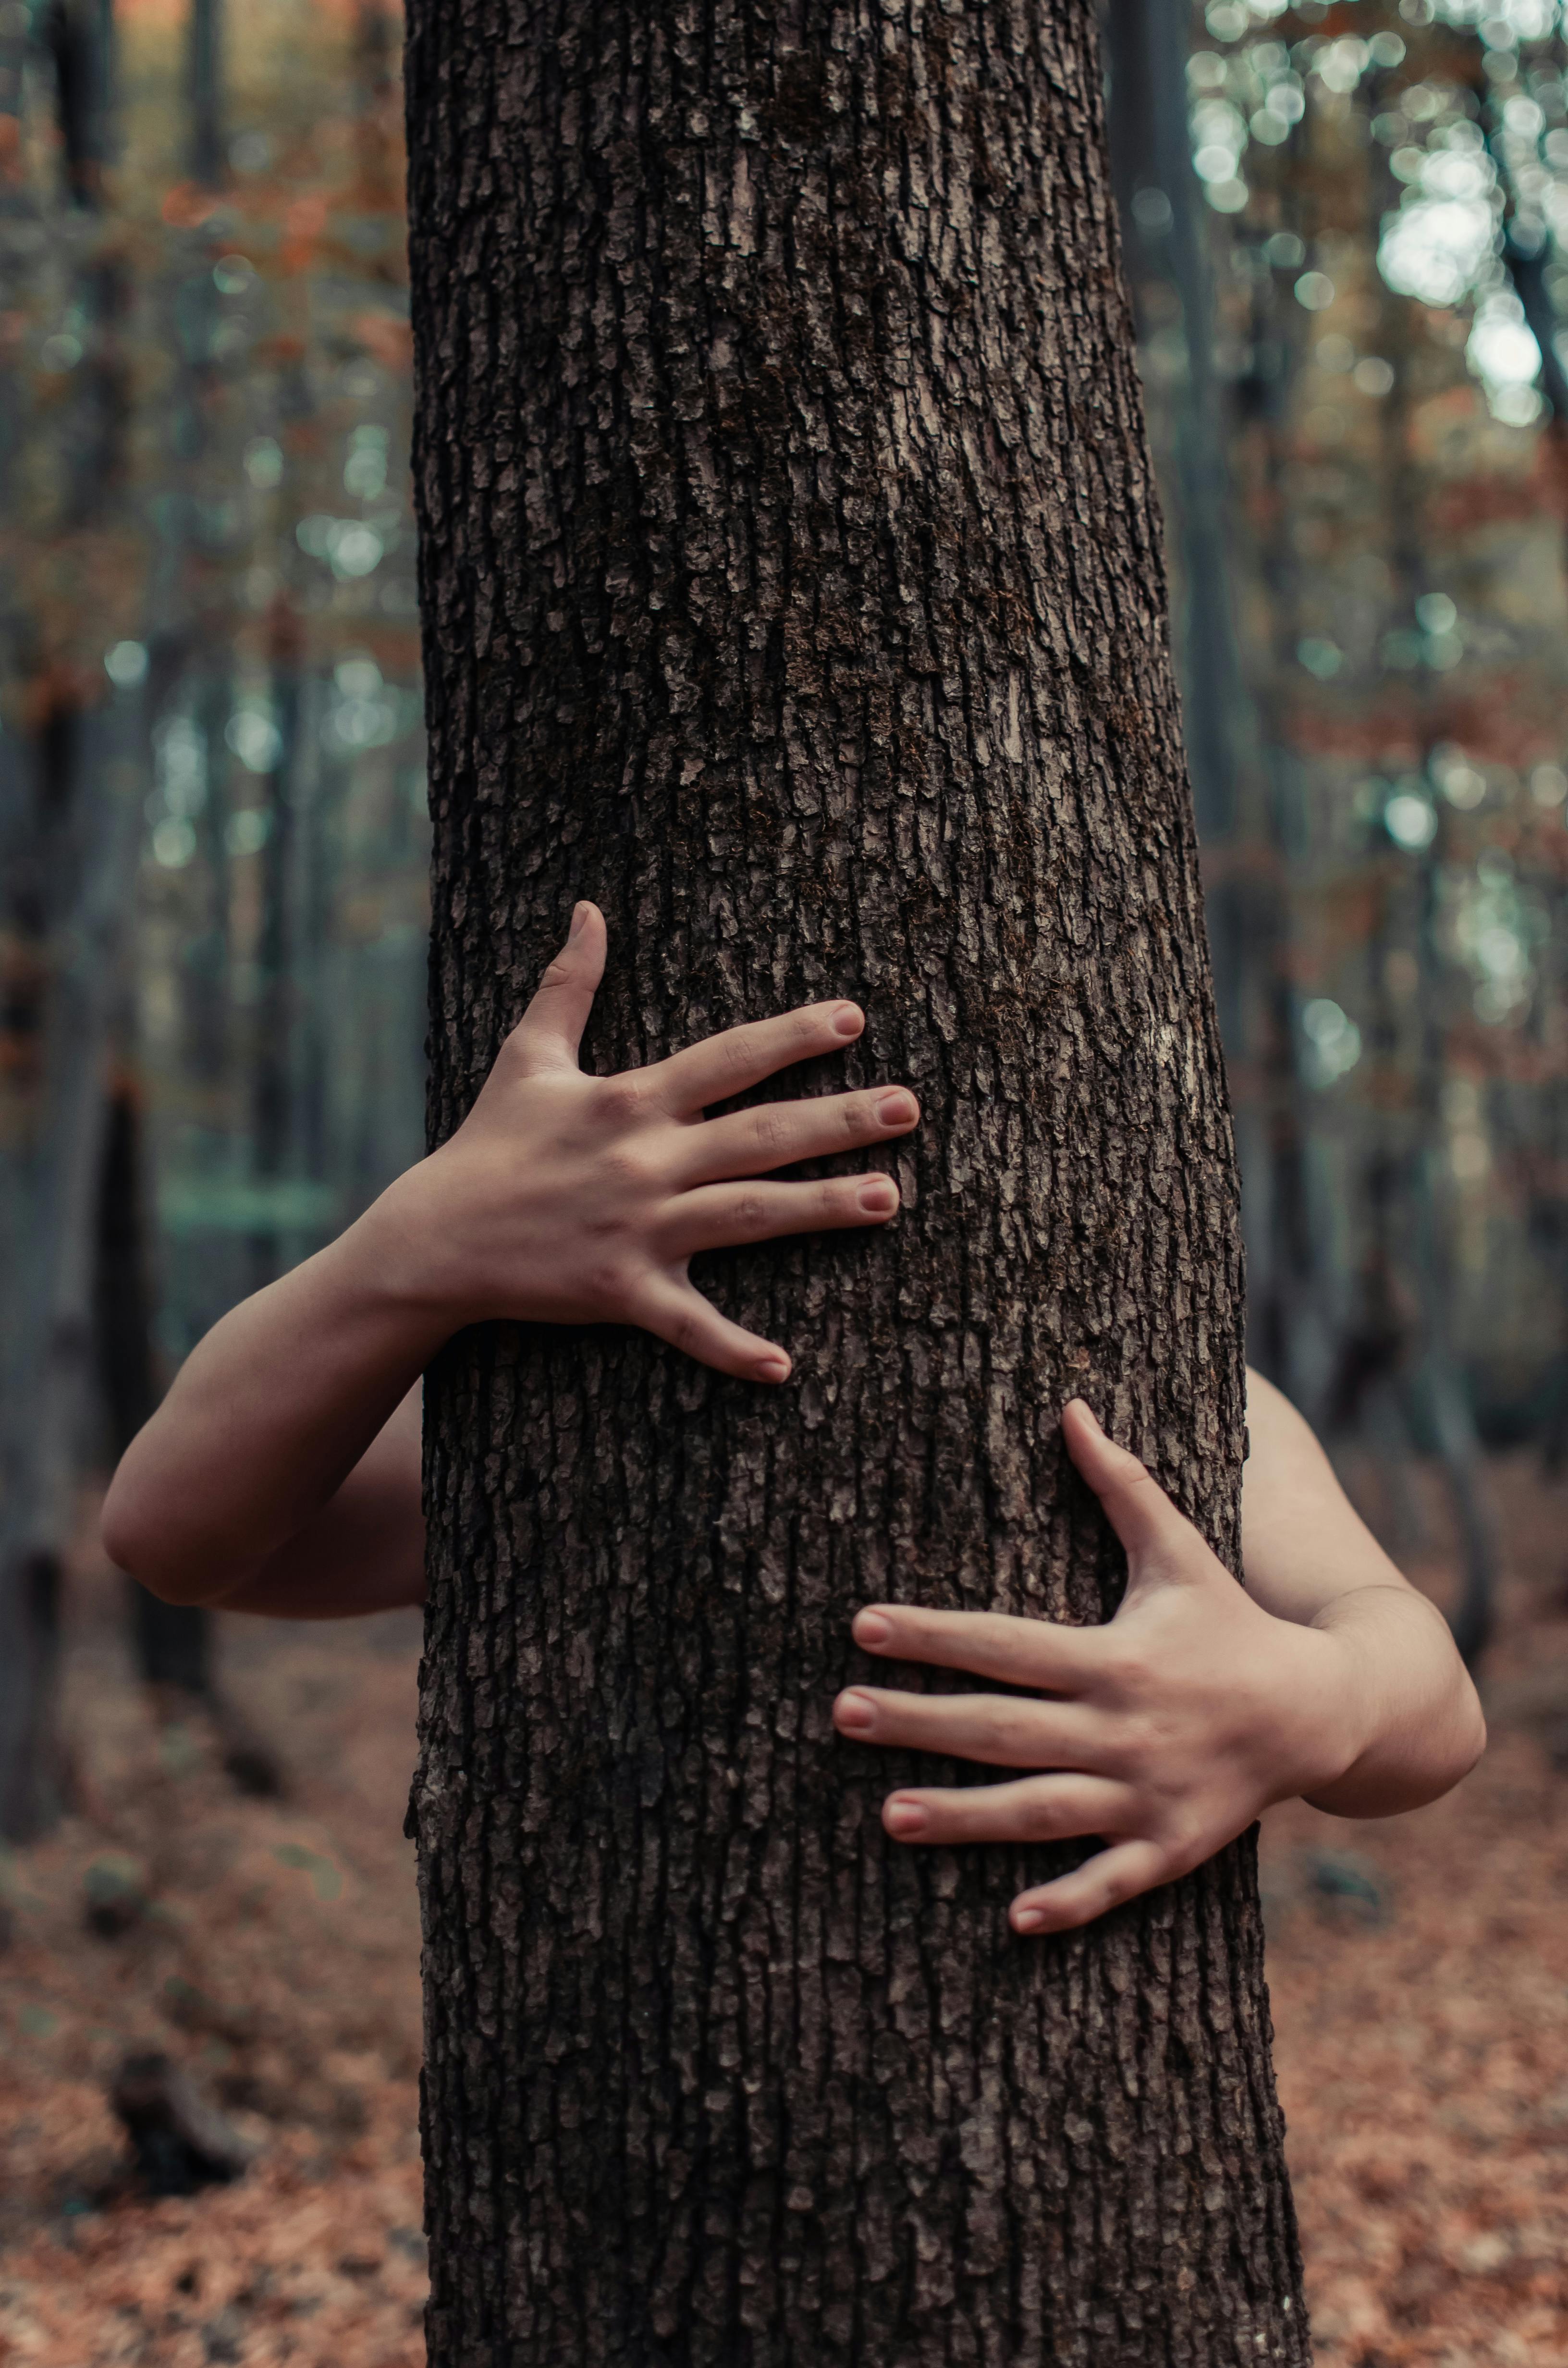 Four hands touching a tree trunk stock photo